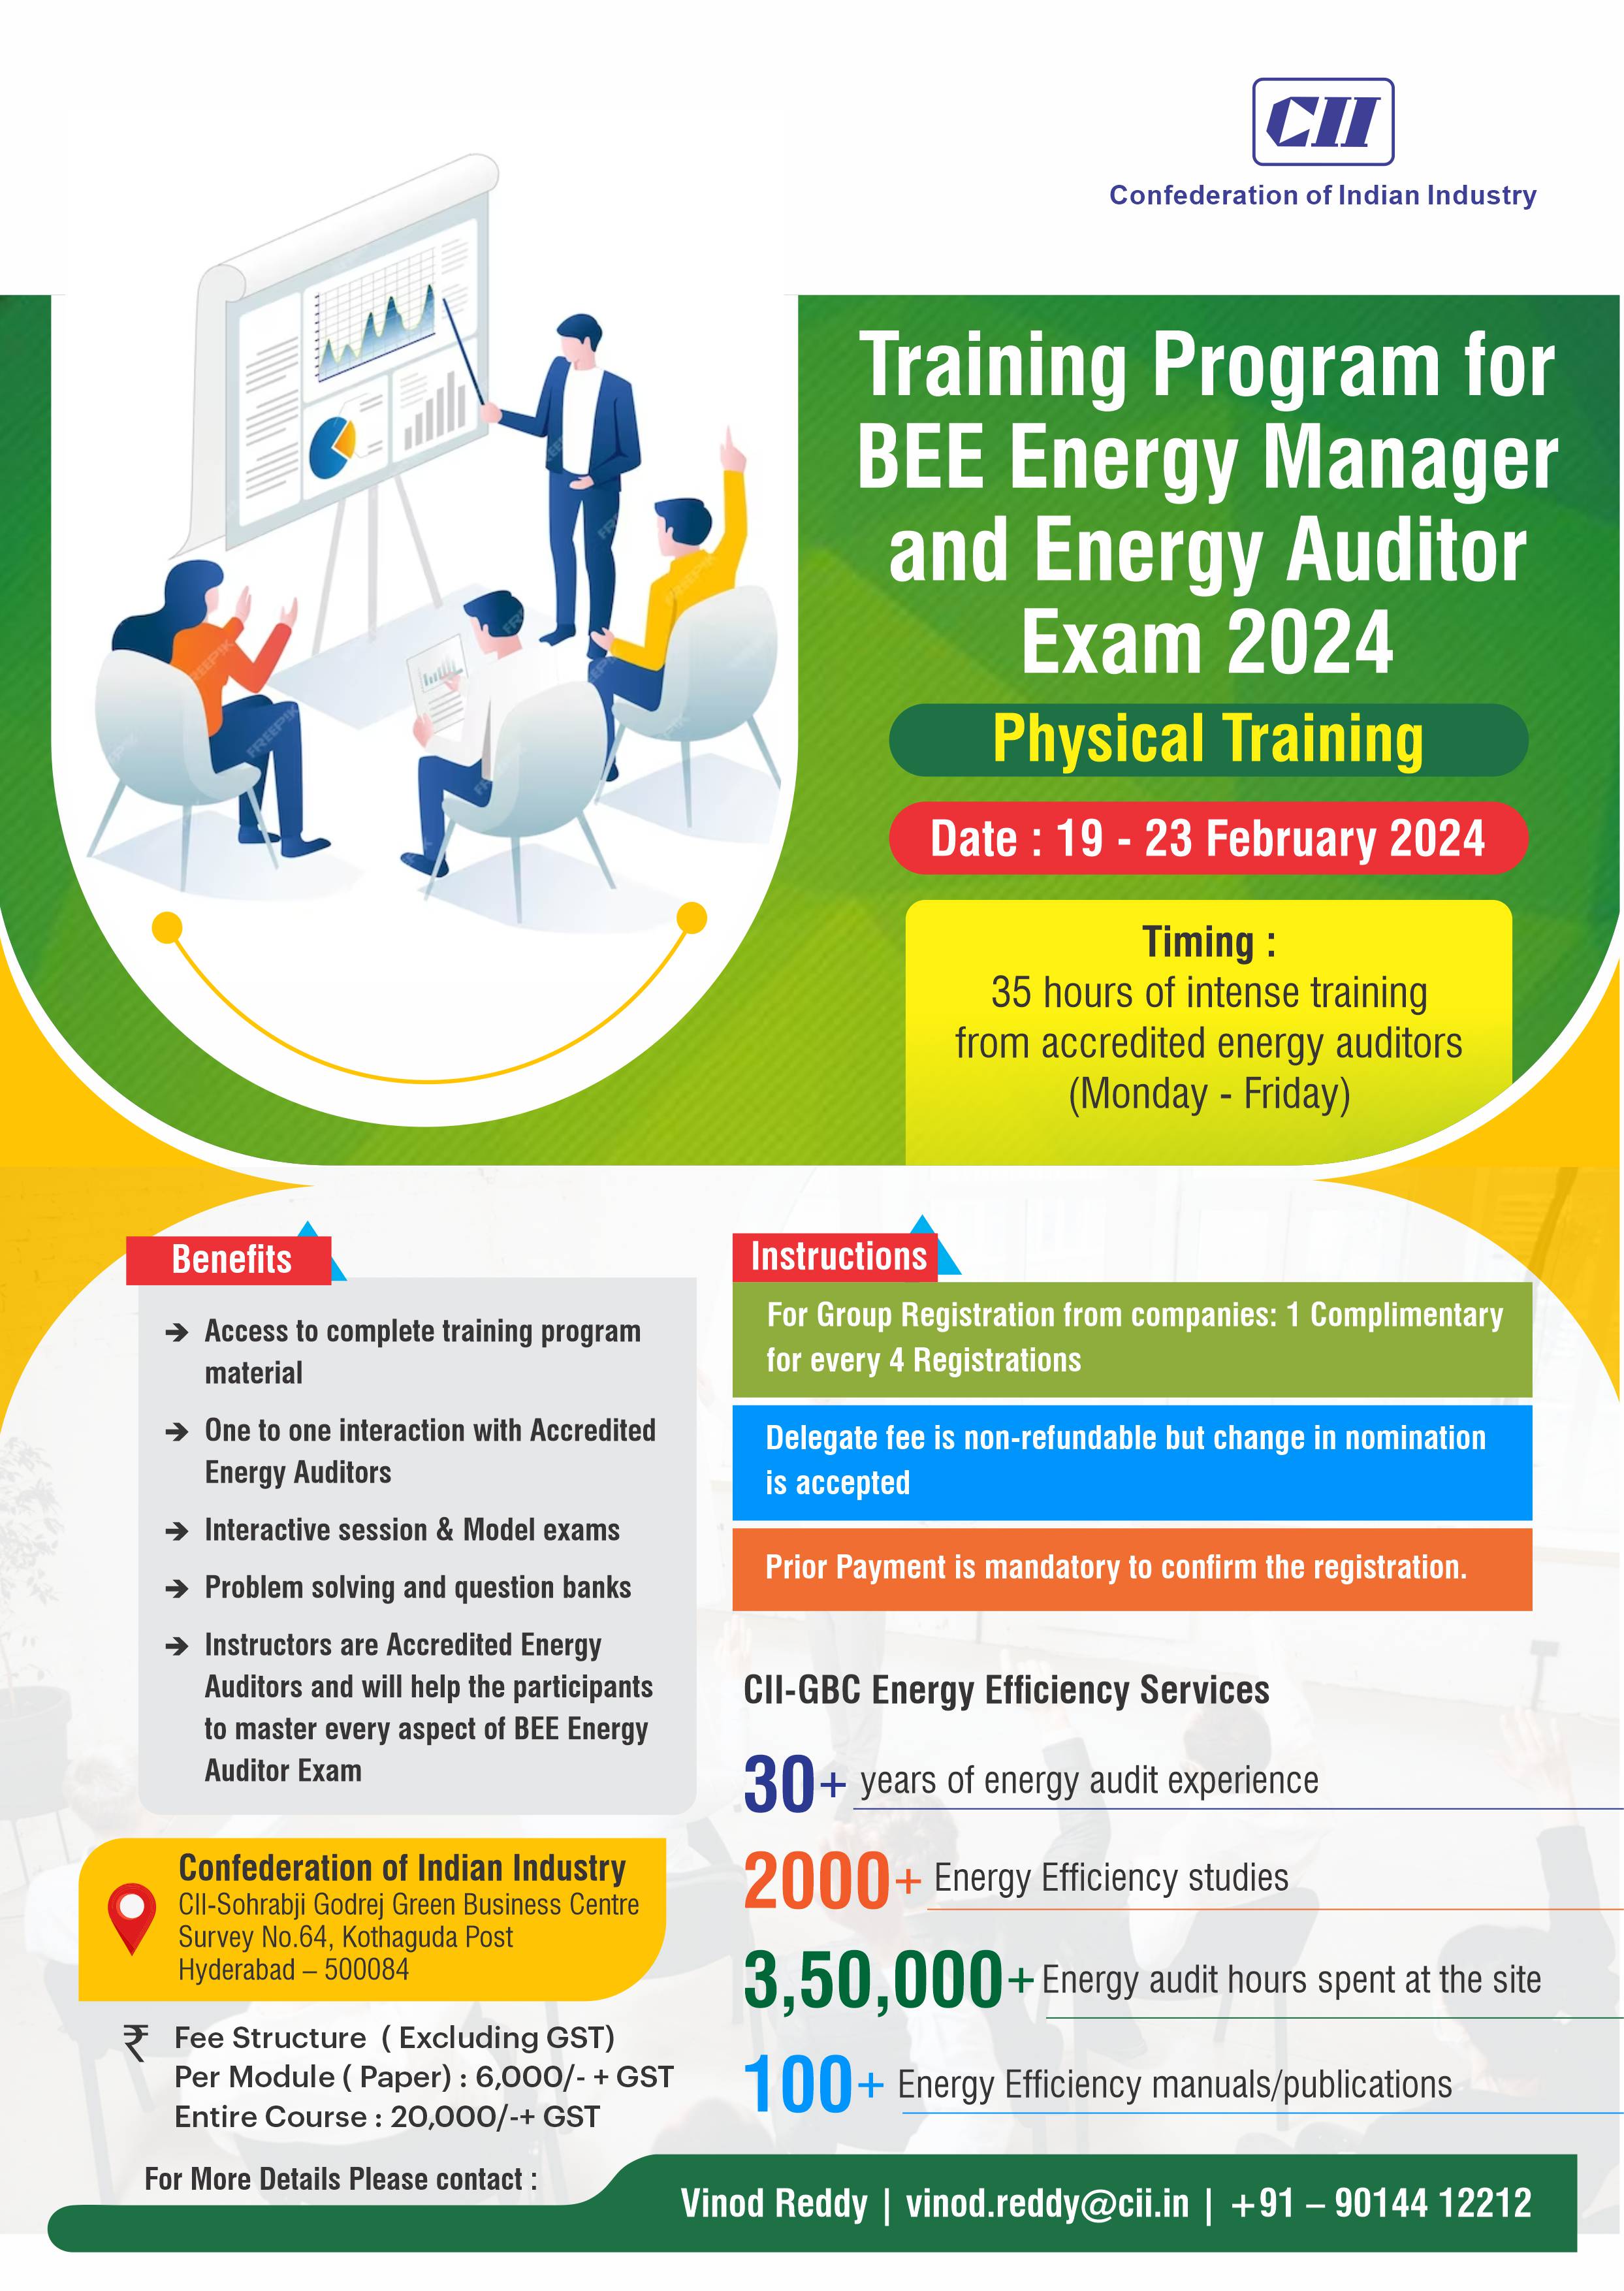 Training Program for BEE Energy Manager and Energy Auditor Exam 2024